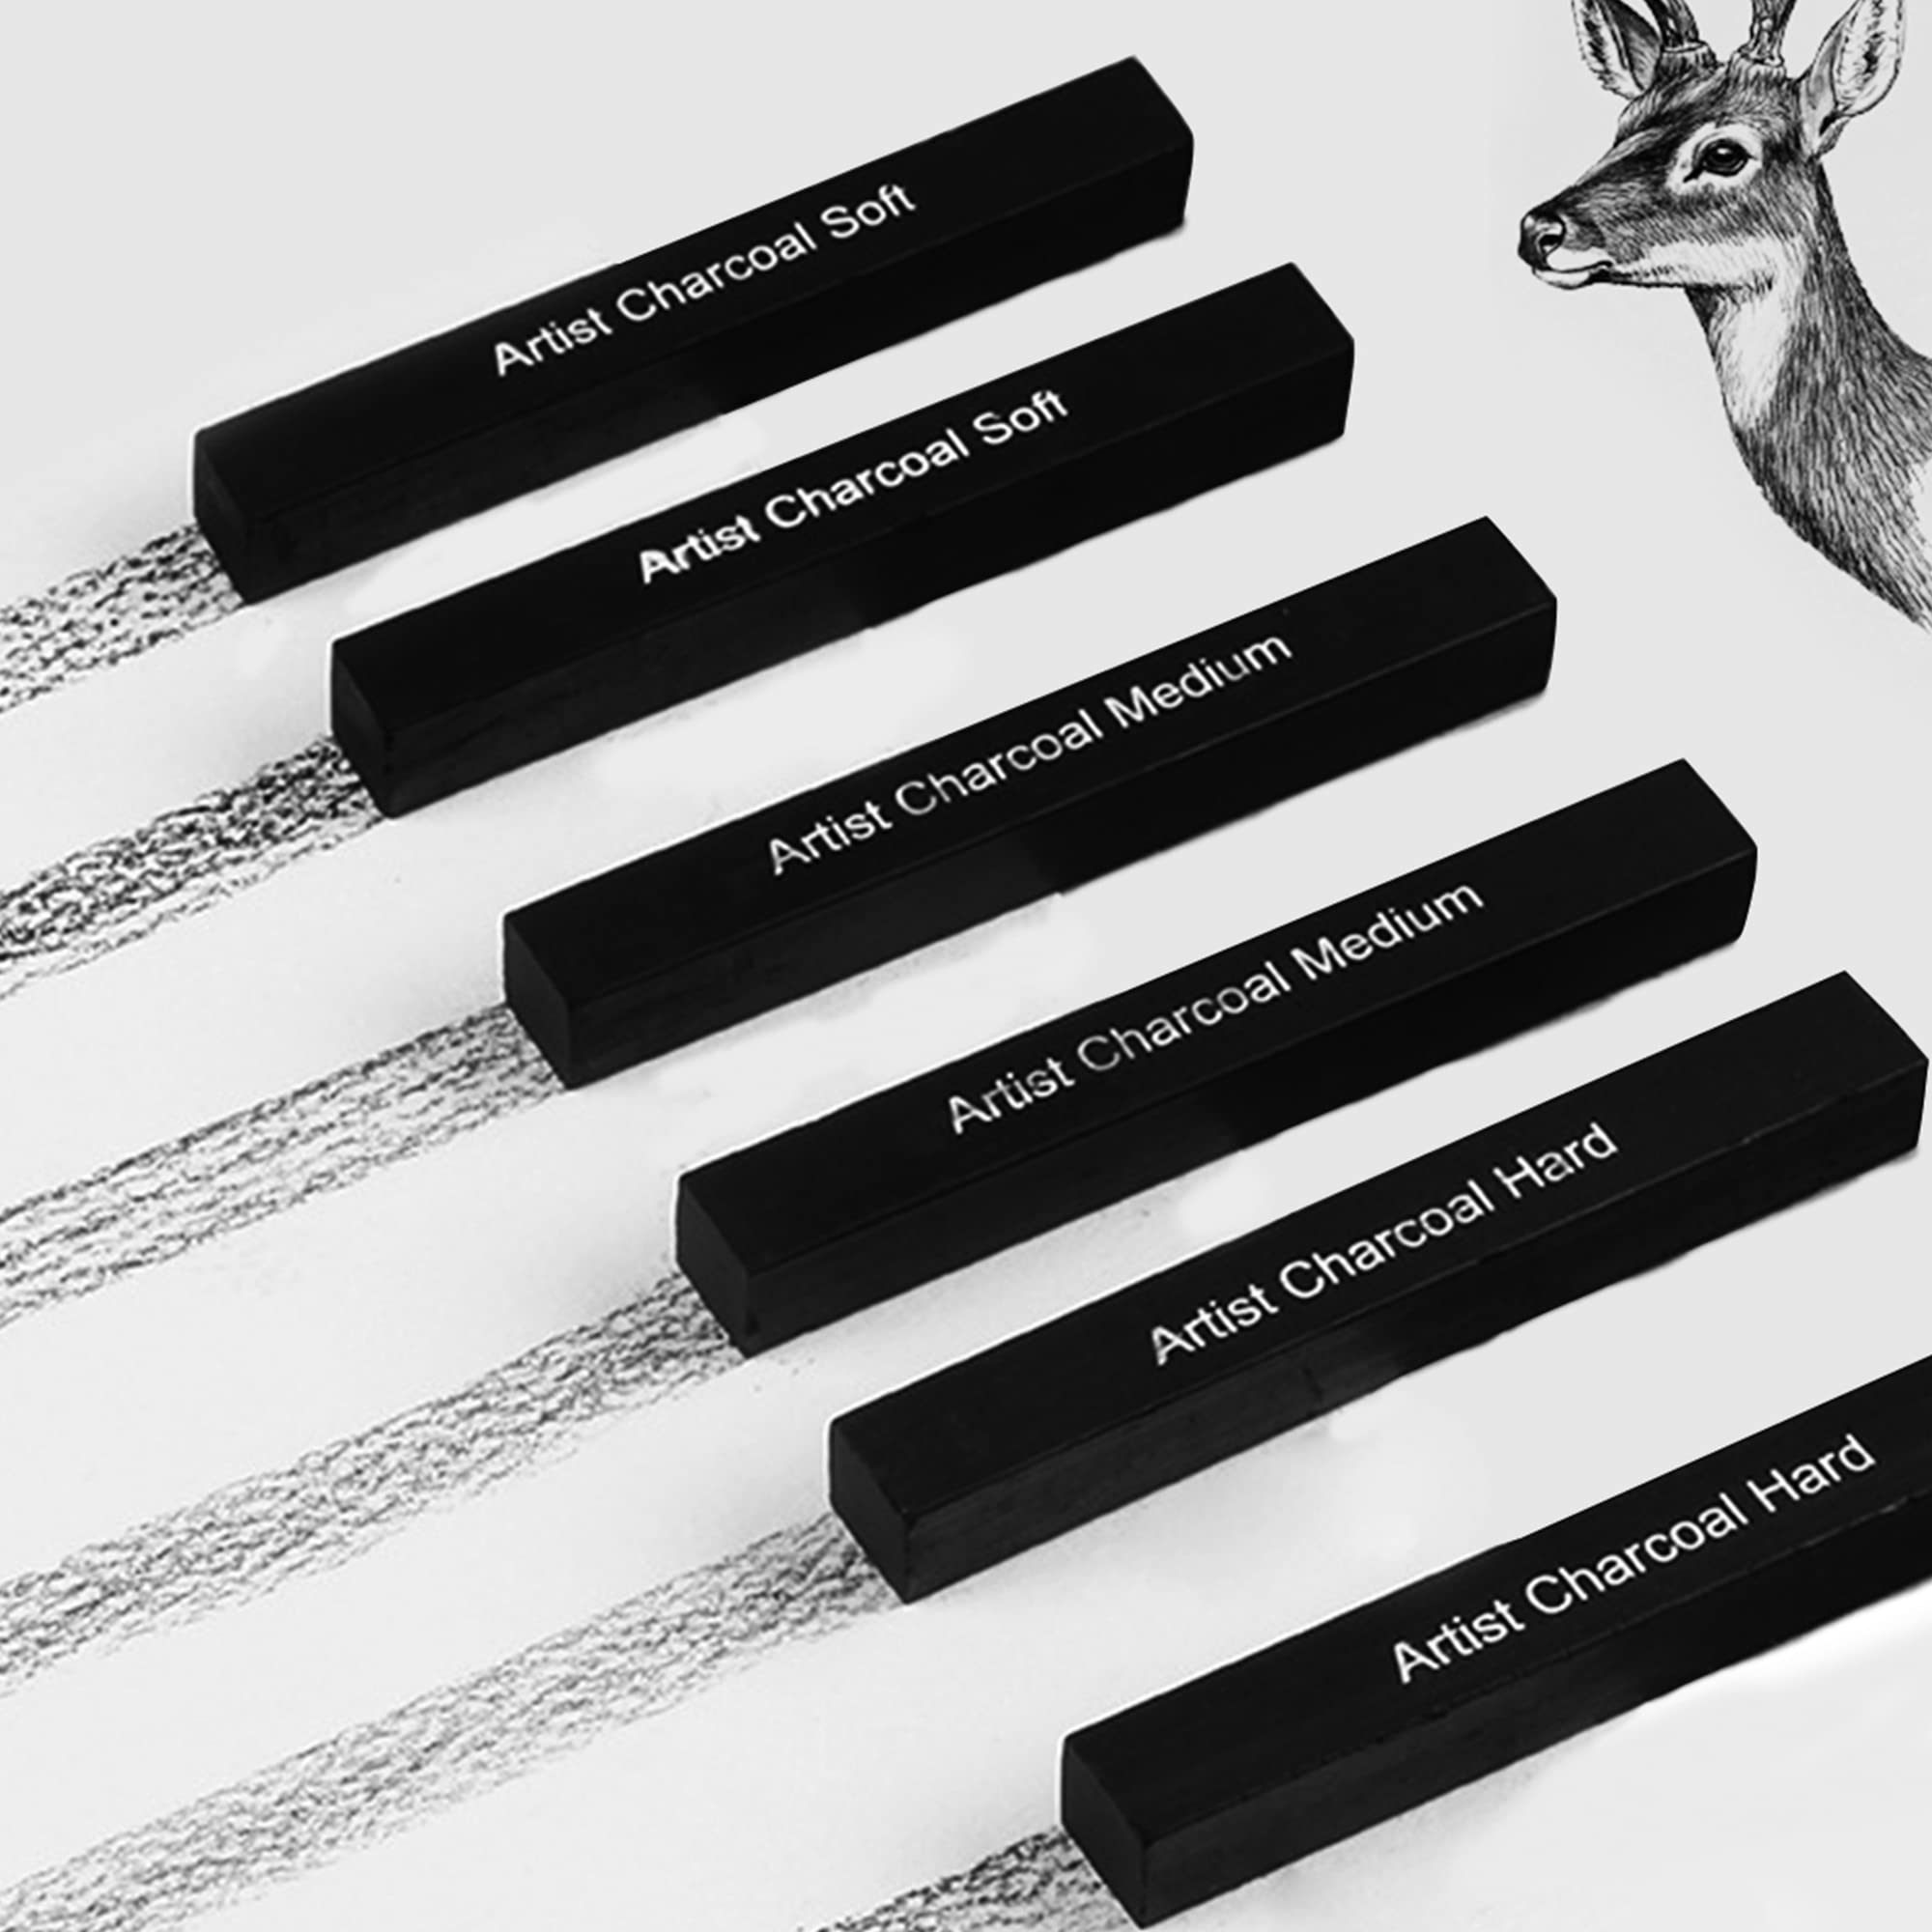 12 Pack Compressed Charcoal Sticks Vine Charcoal Stick for Drawing